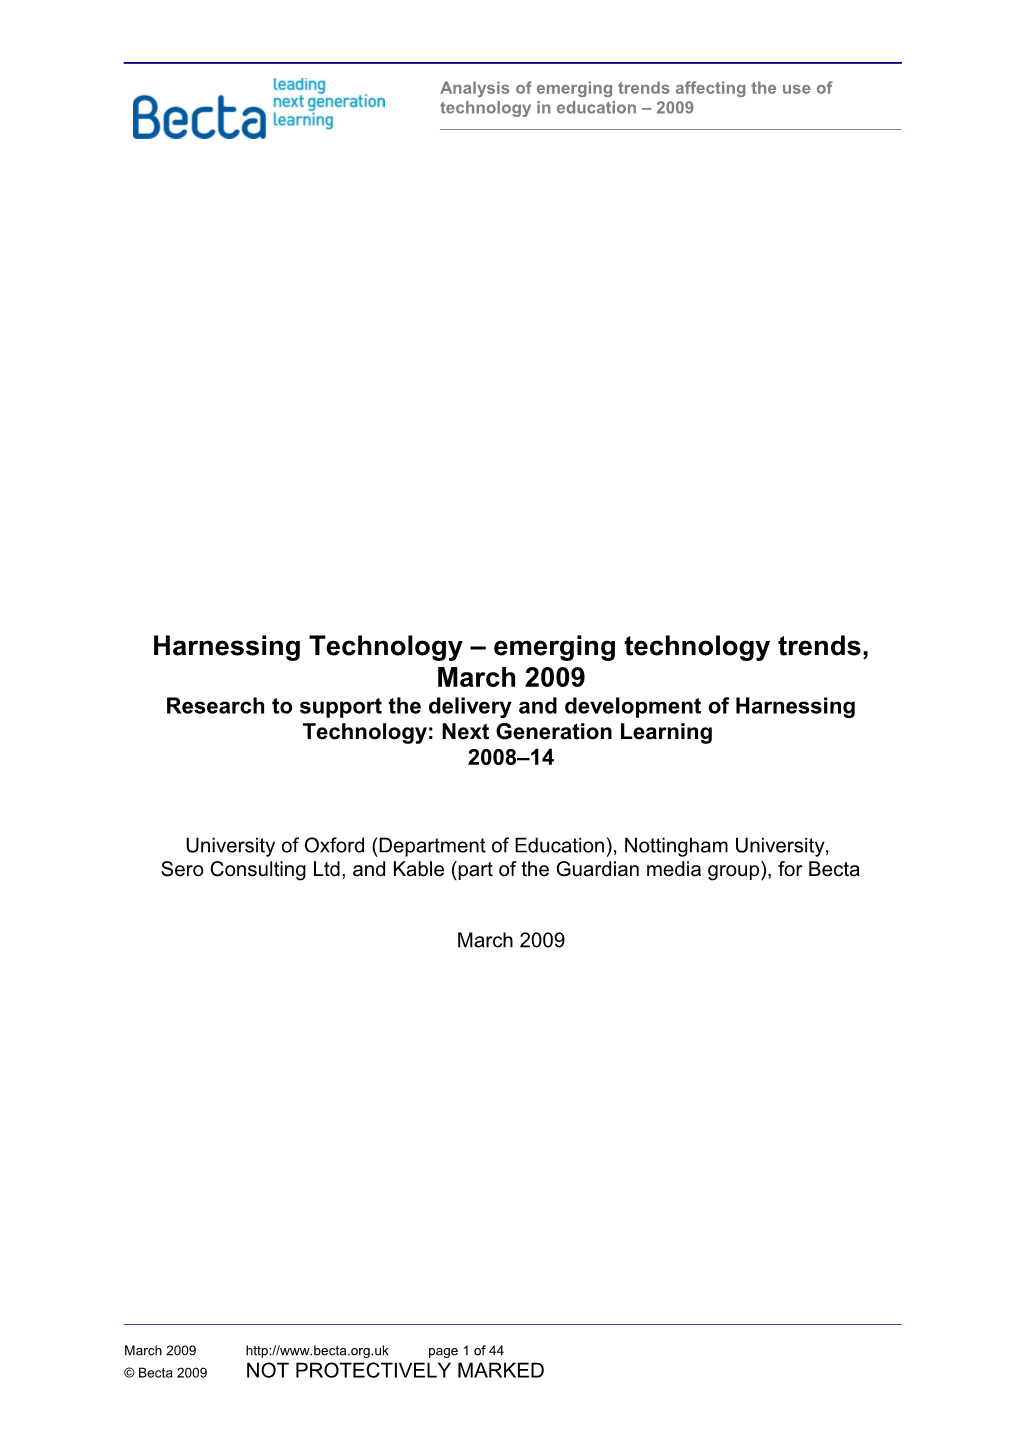 Analysis of Emerging Trends Affecting the Use of Technology in Education 2009